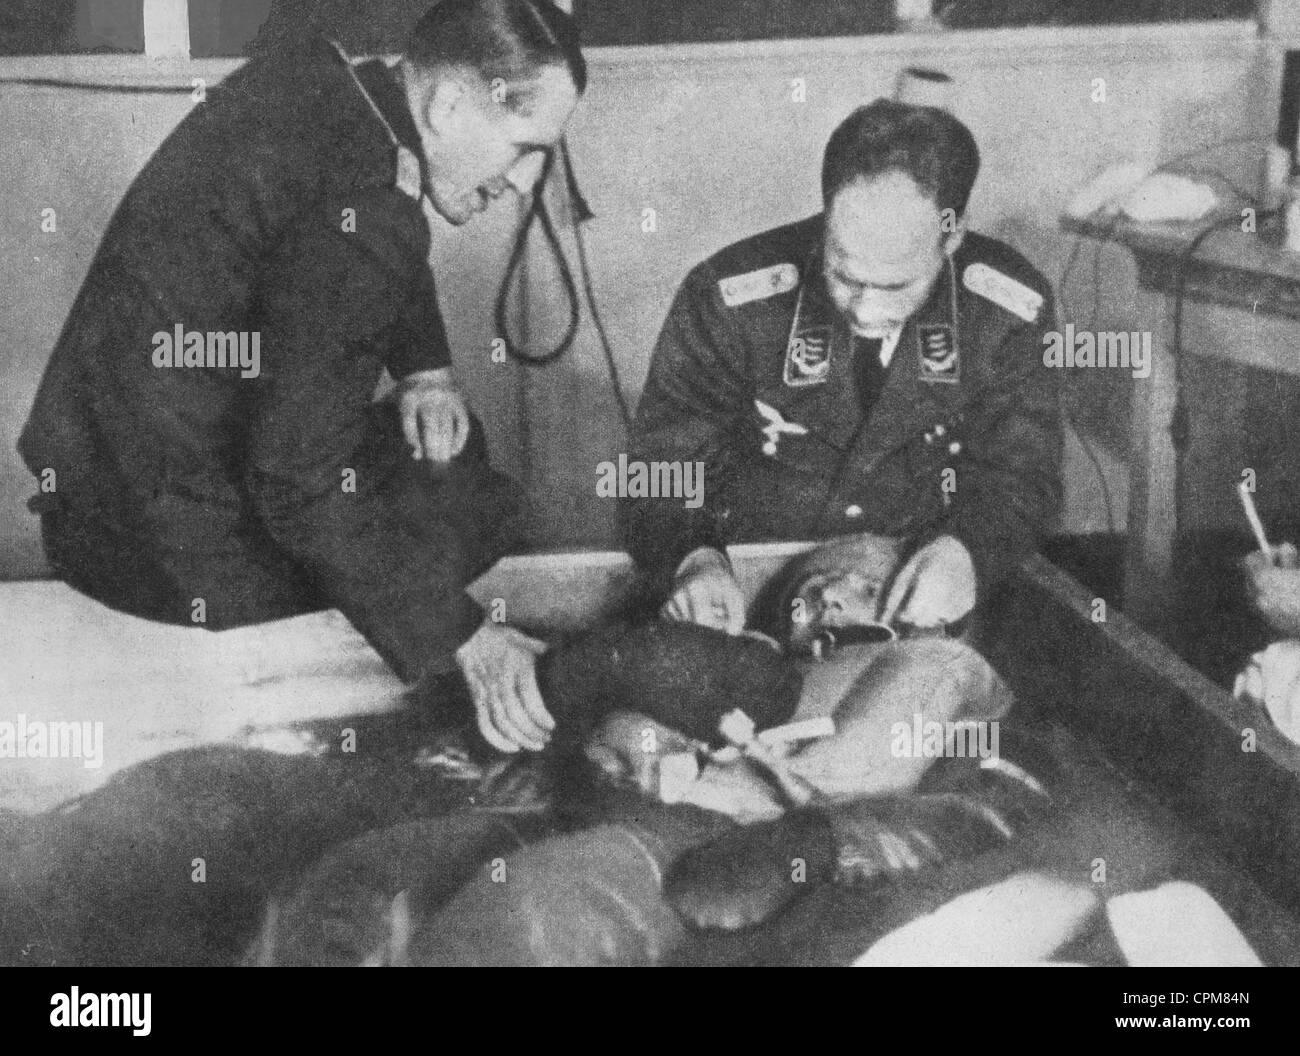 Nazi physicians performing freezing experiments on an internee at Dachau concentration camp, c.1942 (b/w photo) Stock Photo